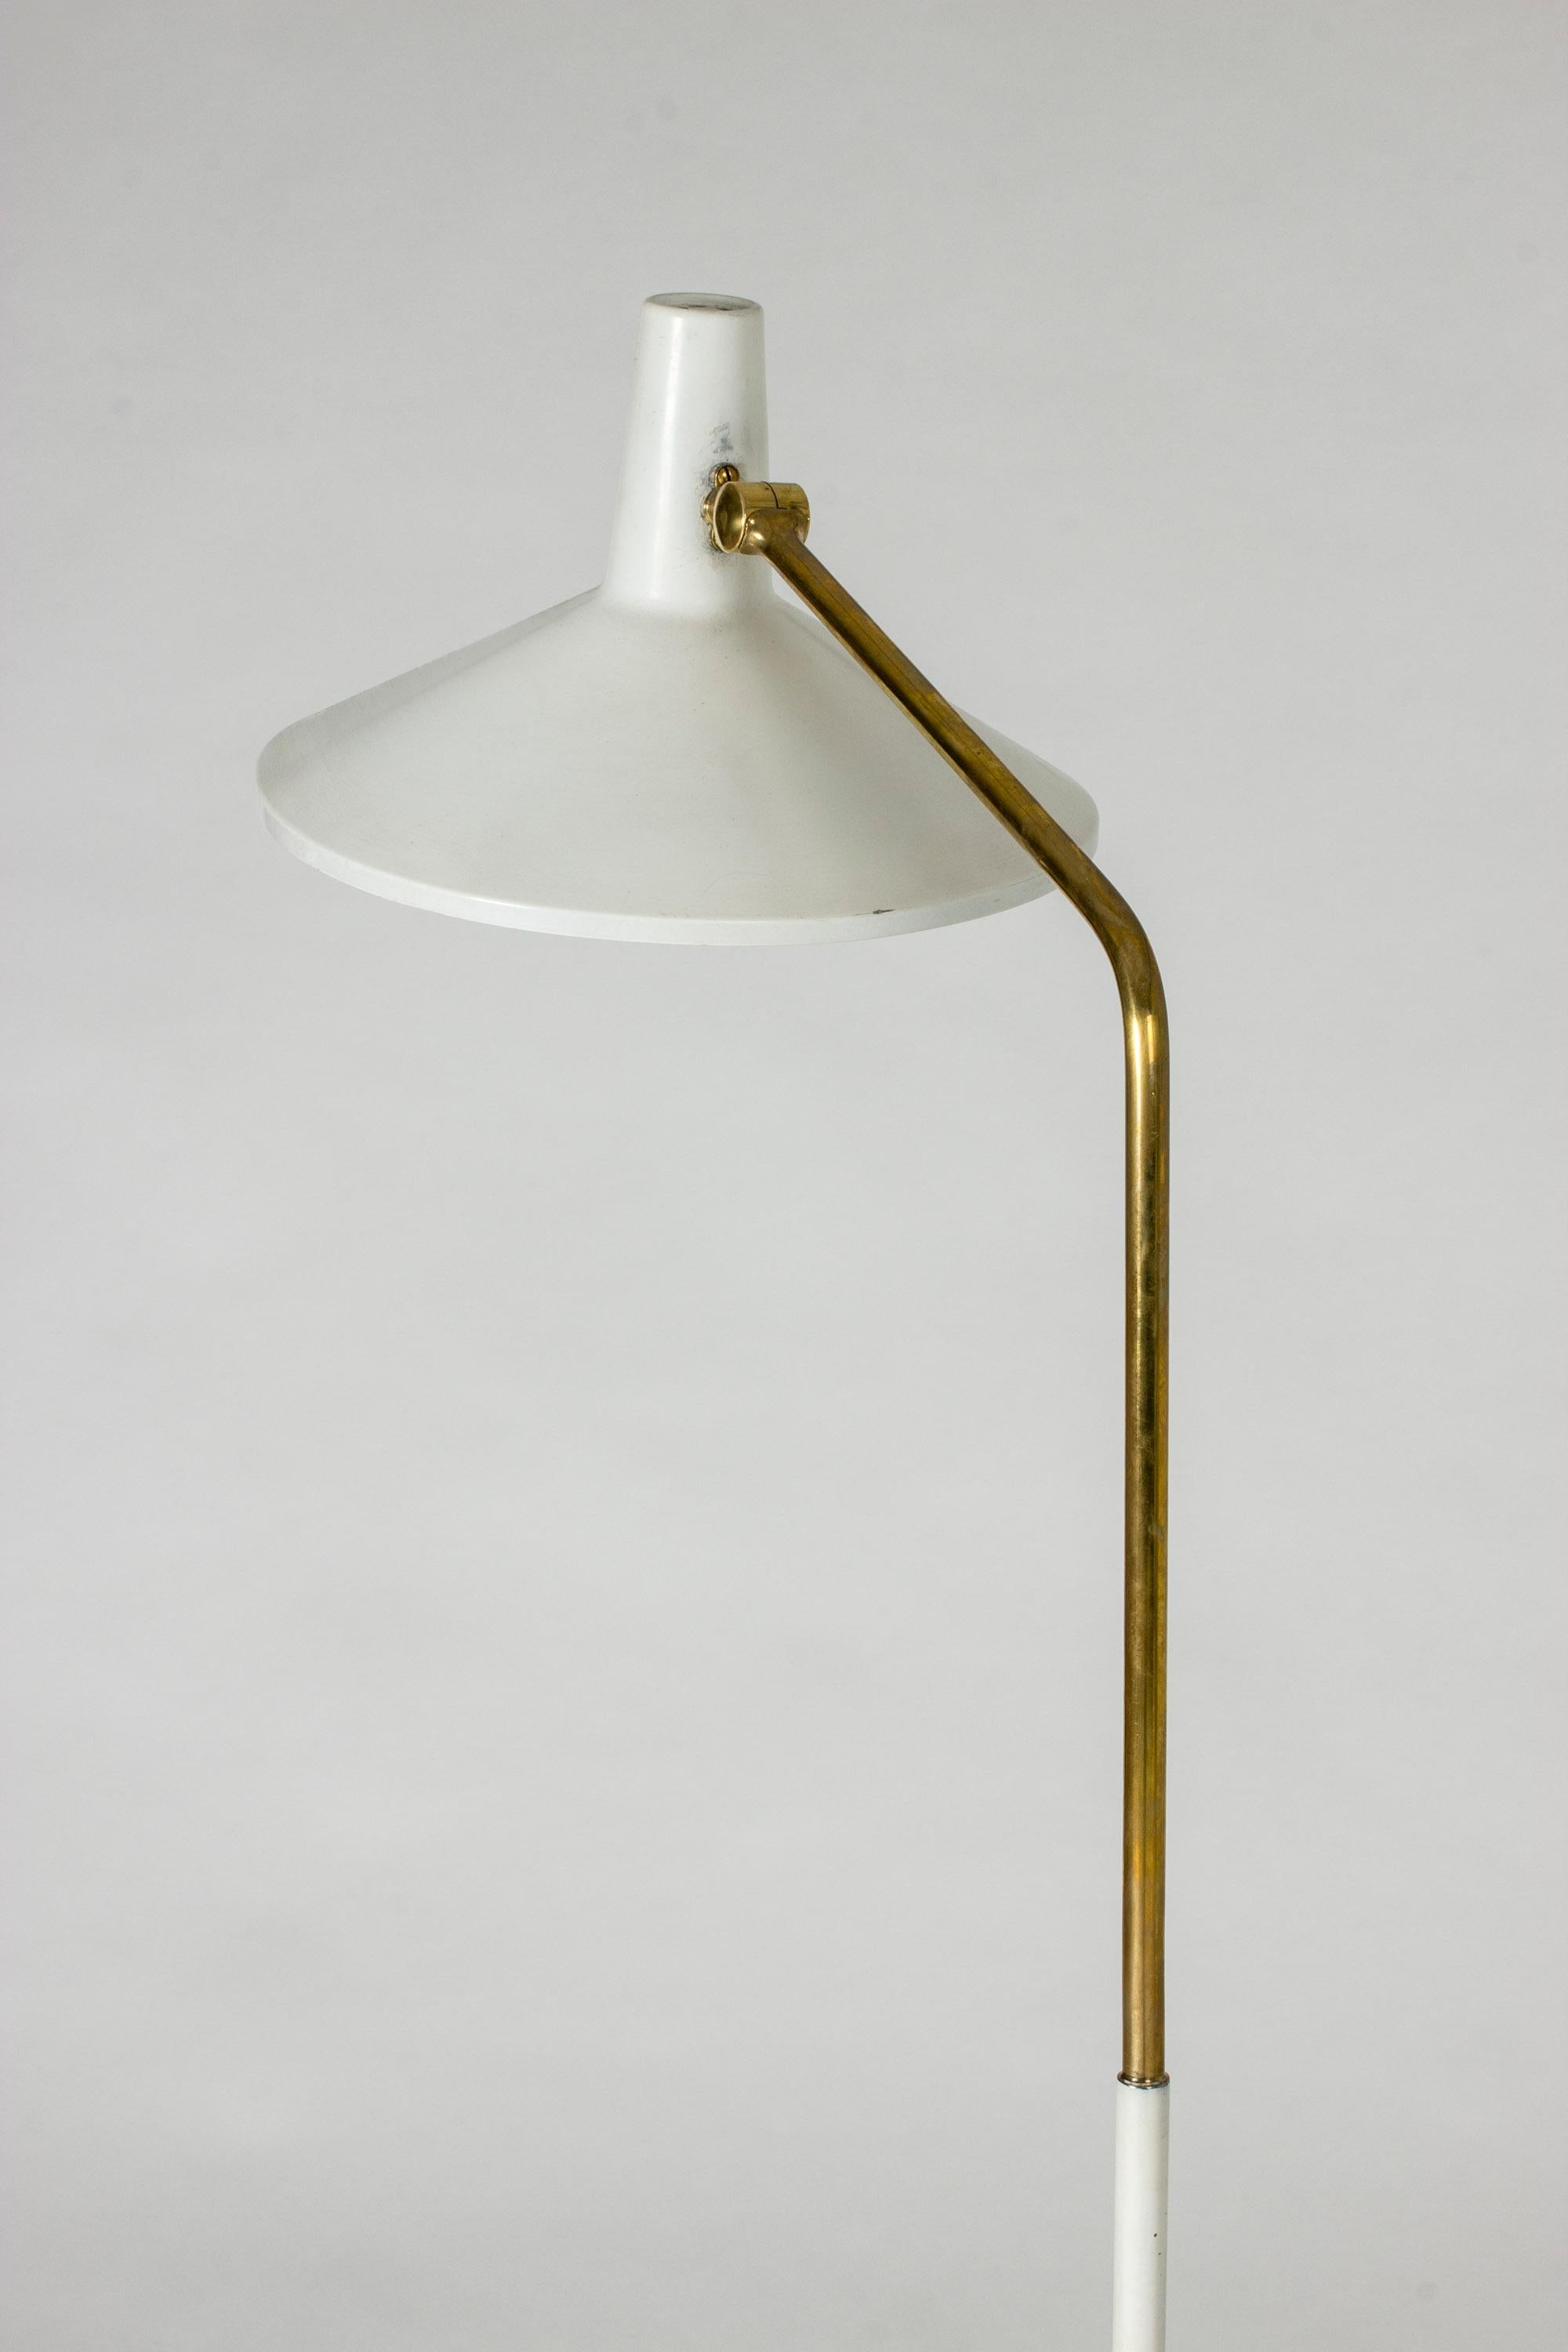 White Lacquer Floor Lamp by Bertil Brisborg In Good Condition For Sale In Stockholm, SE